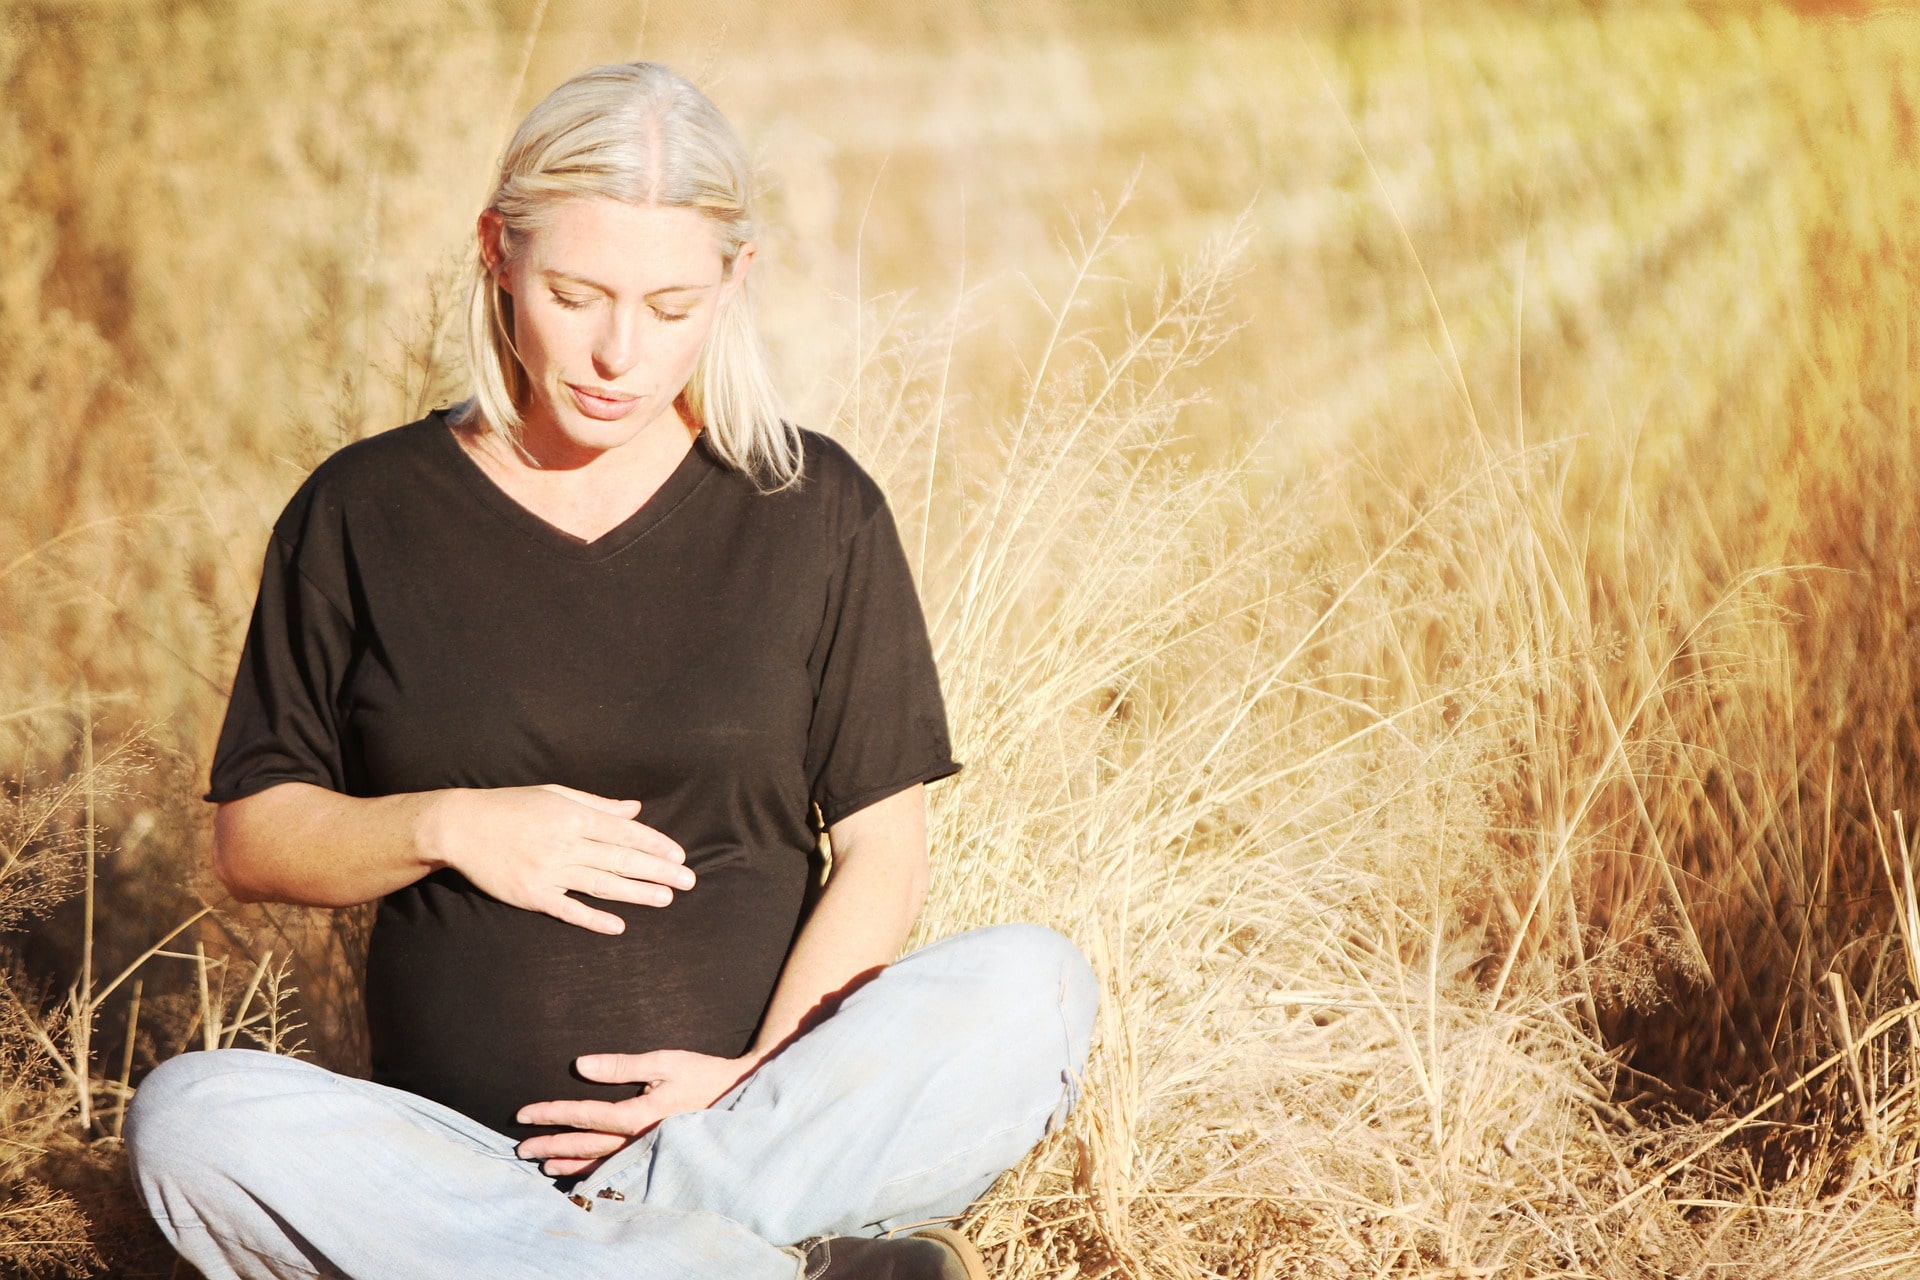 Pregnant woman sitting in field- dental care and pregnancy